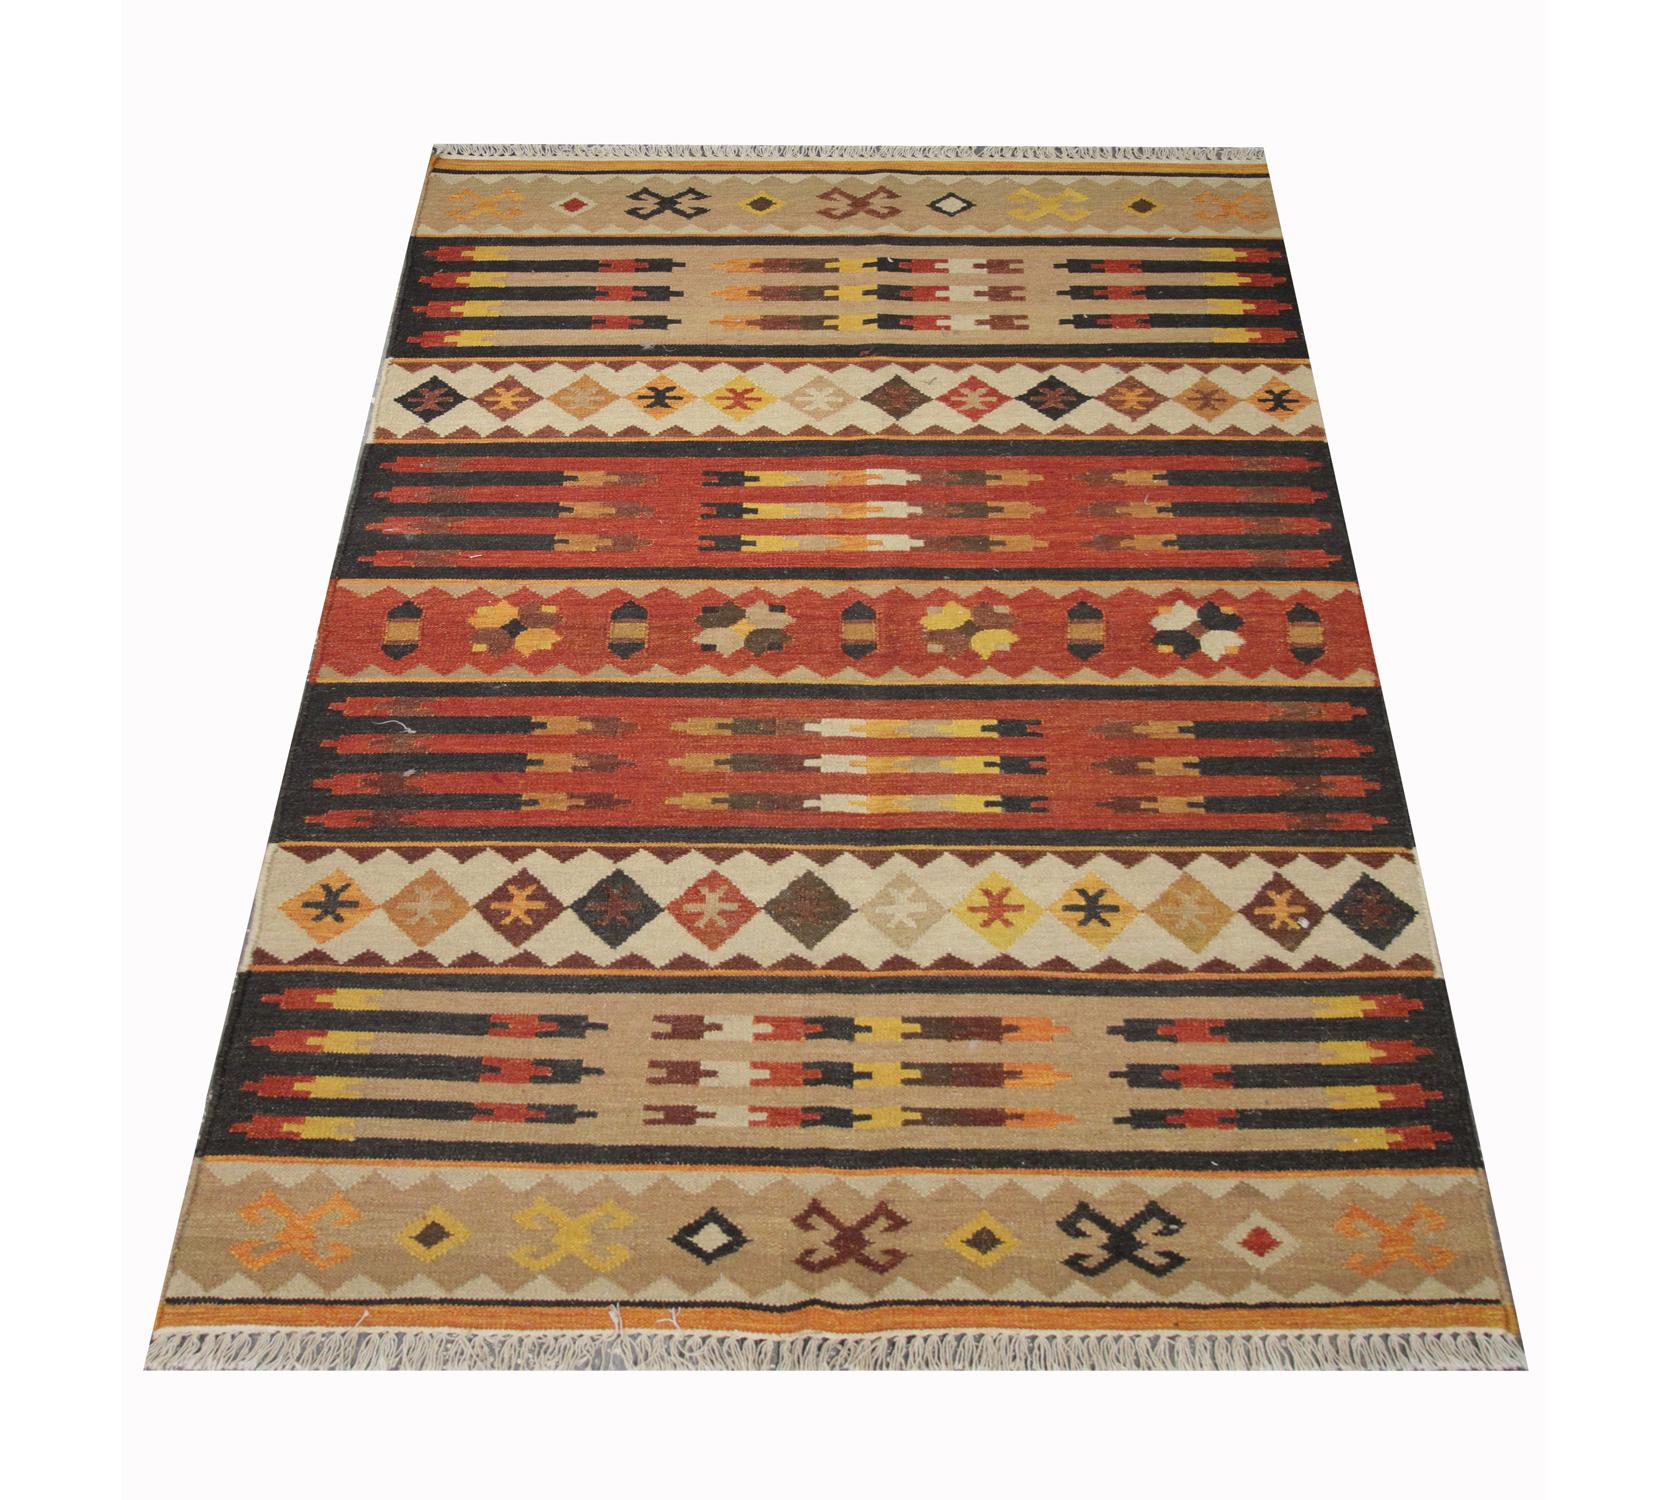 This modern wool kilim was woven by hand in India in the early 21st century. The design features symmetrical geometrical patterns that have been woven in an array of rustic colours, including brown, beige, rust and mustard. The colour palette and